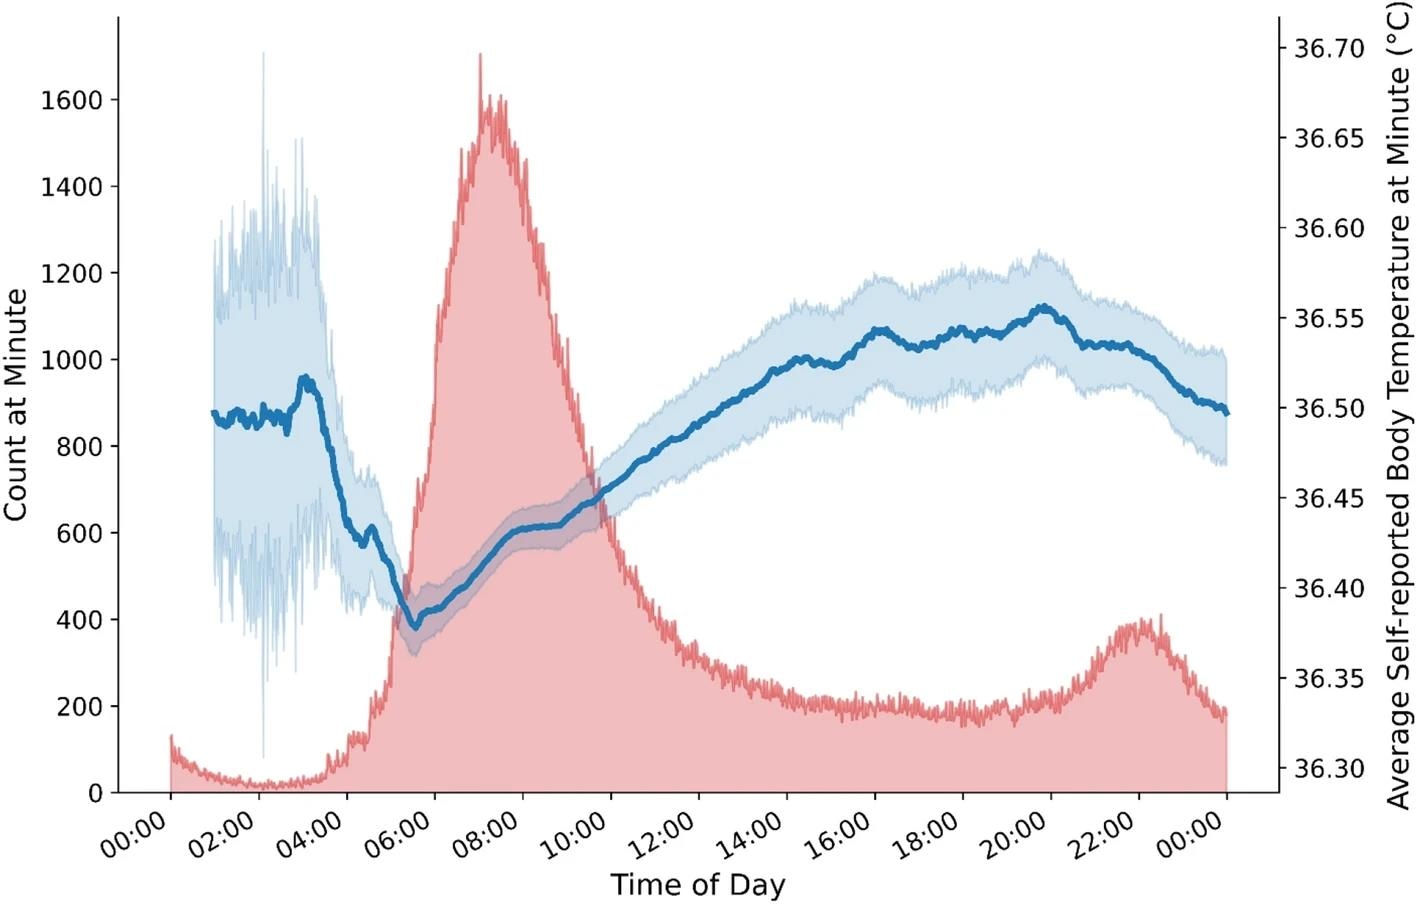 Average self-reported body temperature by time-of-day. Figure depicts expected diurnal pattern of lowest self-reported body temperatures reported in the early morning hours and higher self-reported body temperatures during daytime hours. Note. Blue line depicts average self-reported body temperature (right Y axis) by time of day; blue shading indicates standard error of the mean. Red shading indicates number of responses (left Y axis) provided at each minute (X axis).